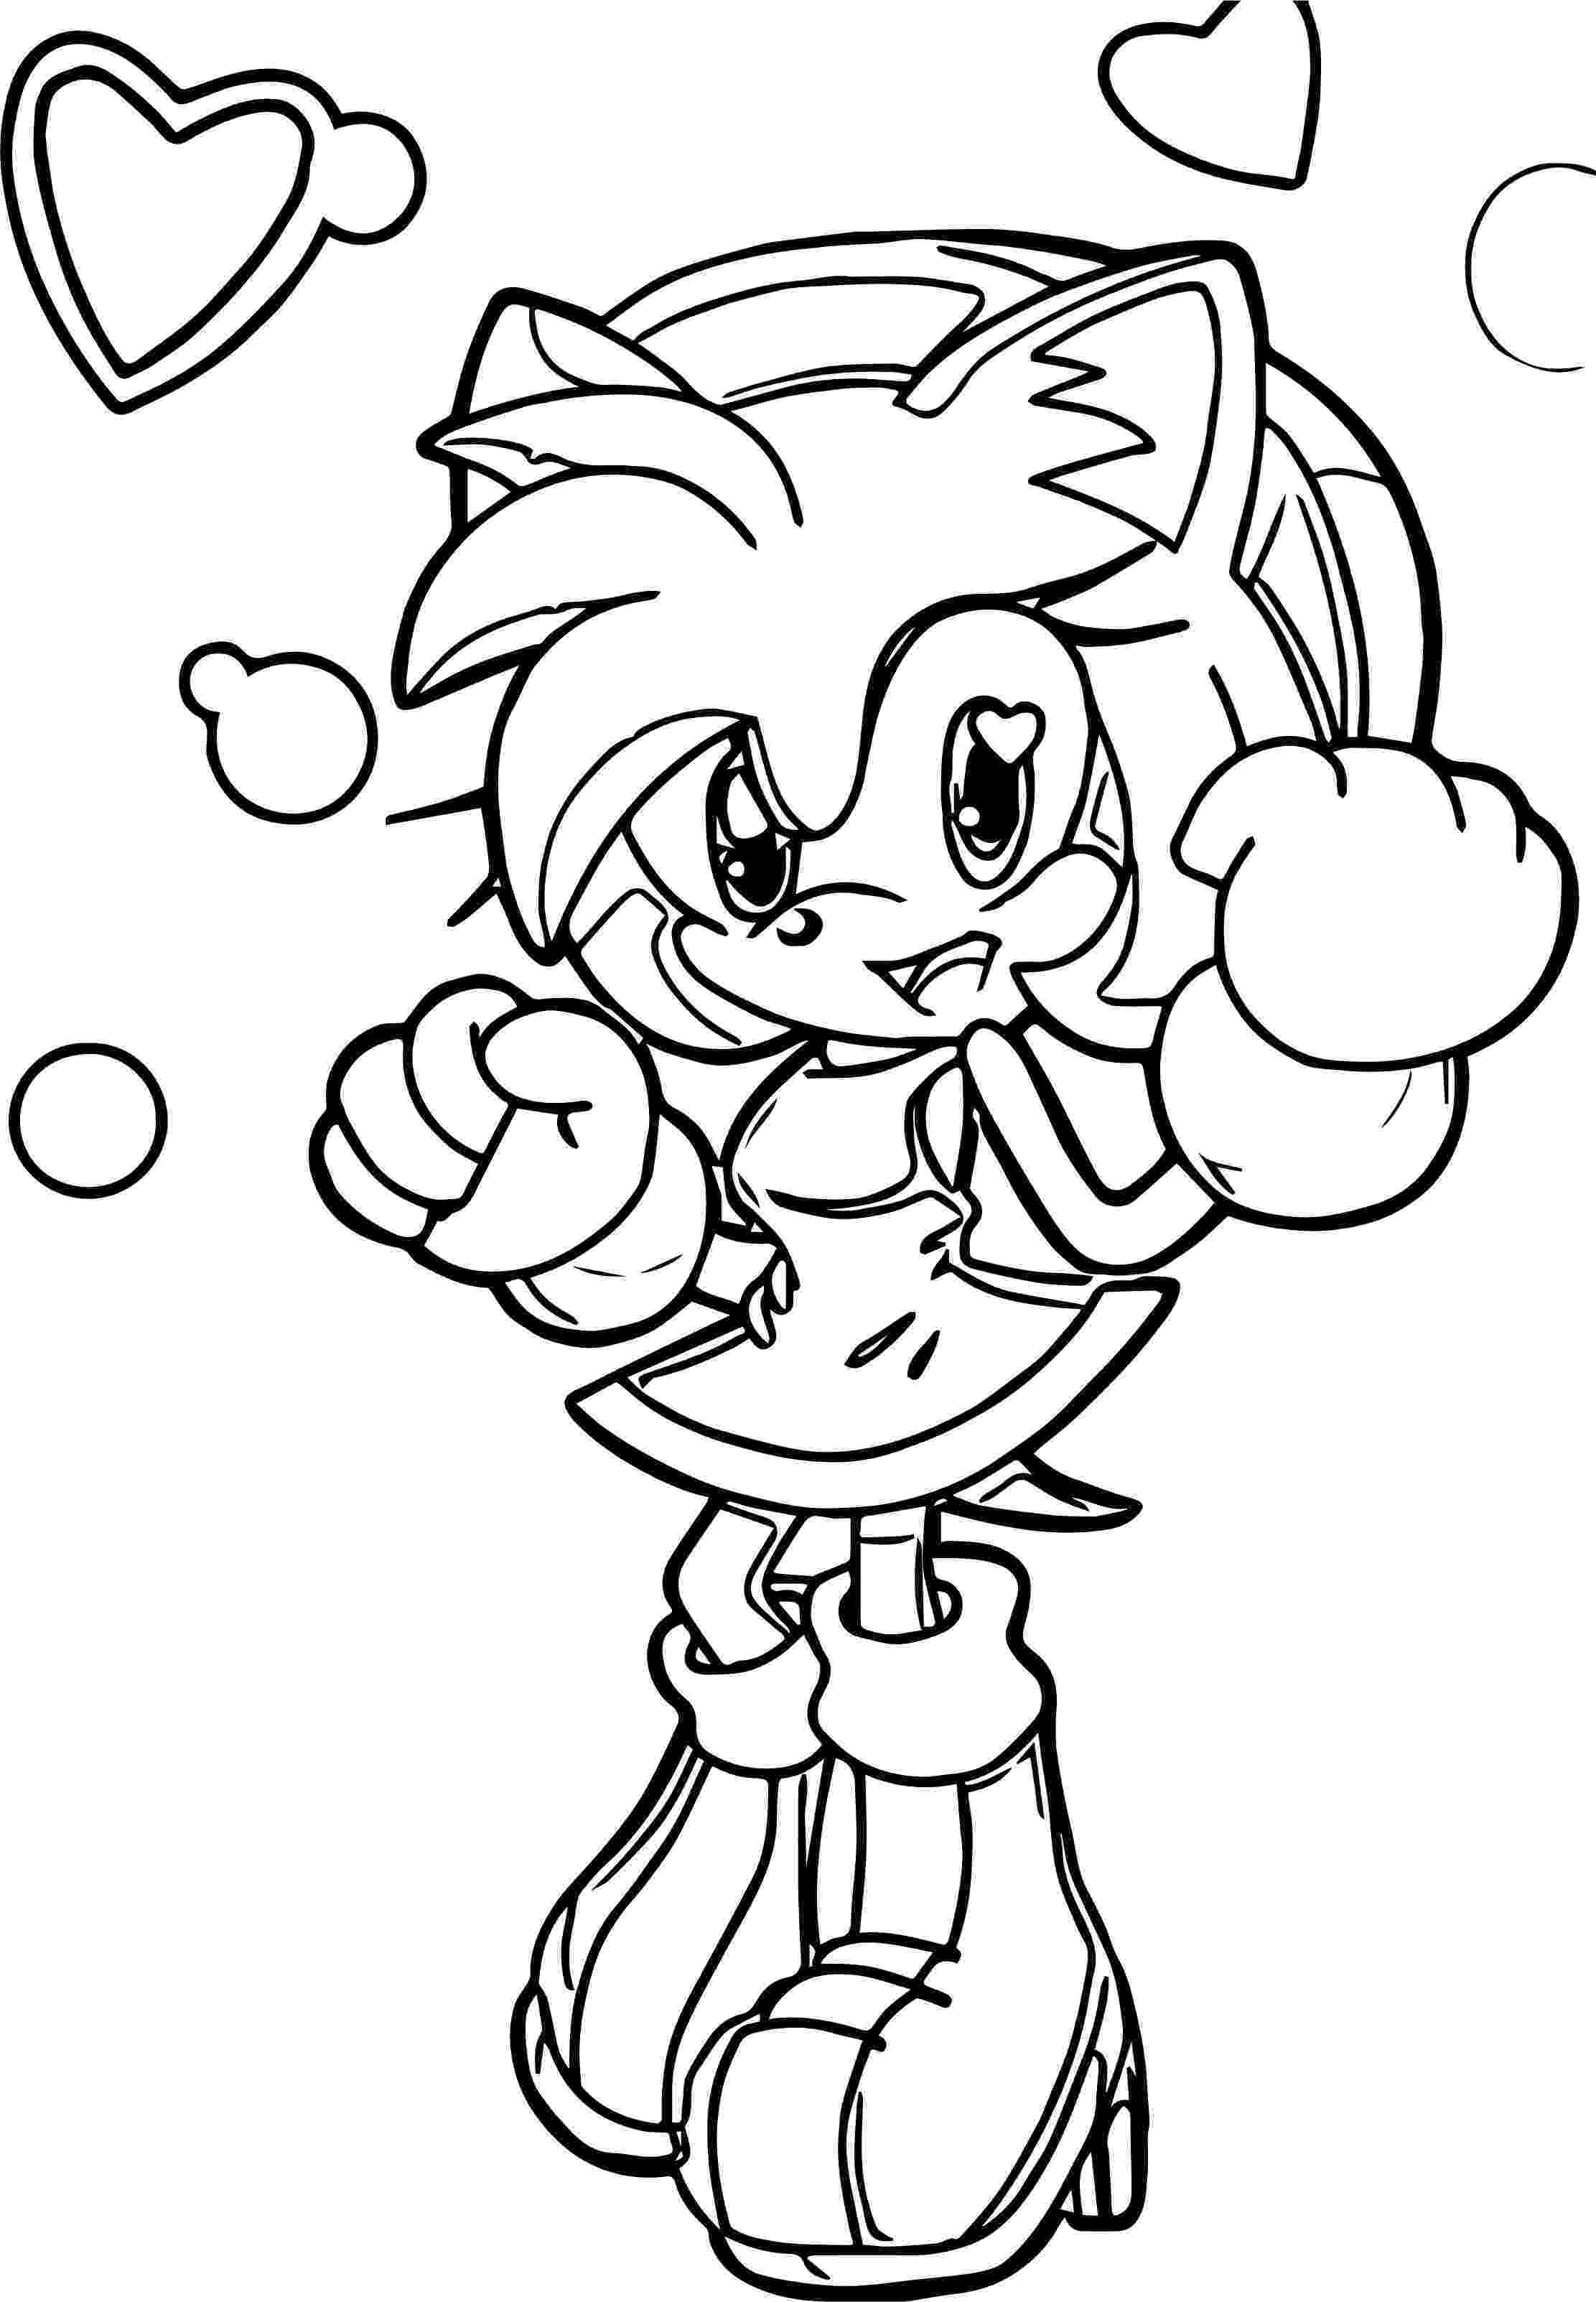 sonic amy coloring pages amy rose and sonic action coloring page wecoloringpagecom coloring sonic pages amy 